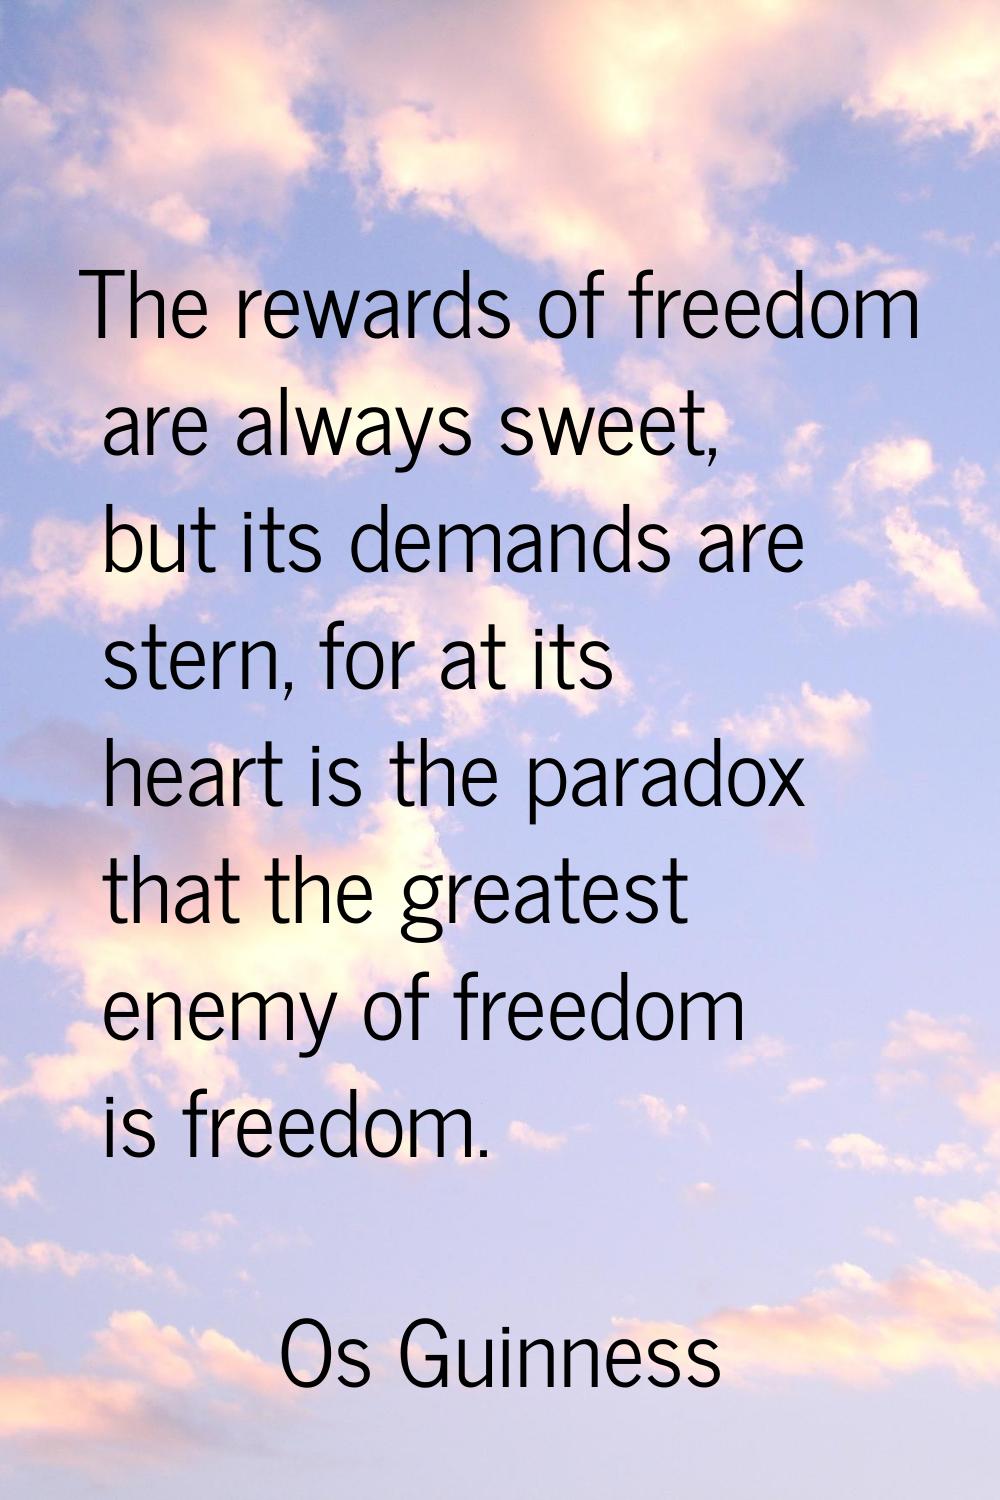 The rewards of freedom are always sweet, but its demands are stern, for at its heart is the paradox